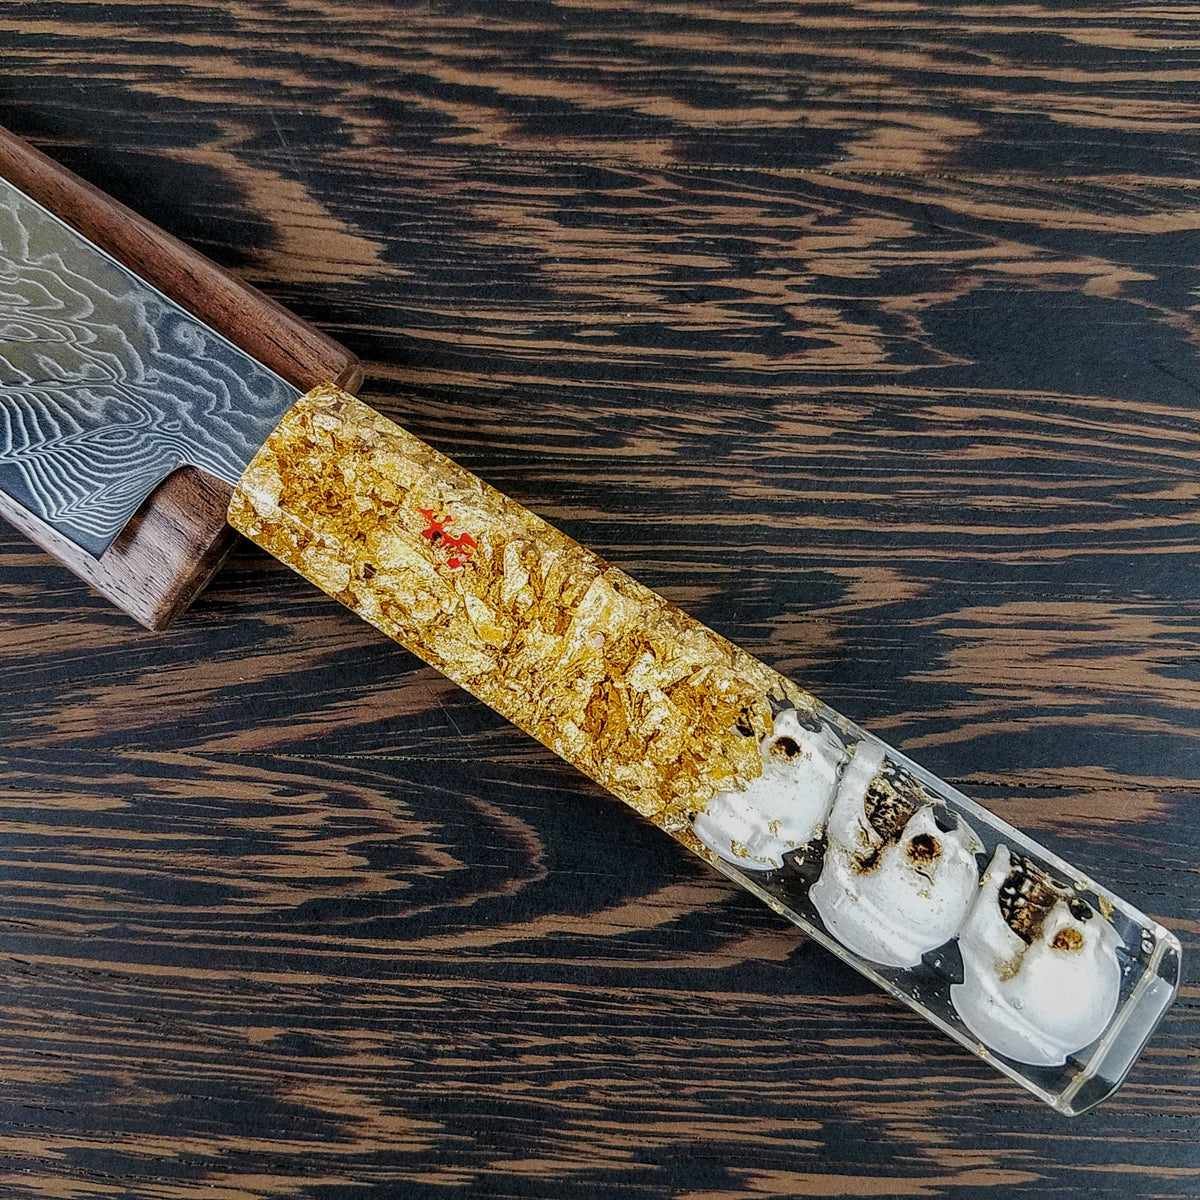 Cannibal Totem - 6in (150mm) Damascus Petty Culinary Knife